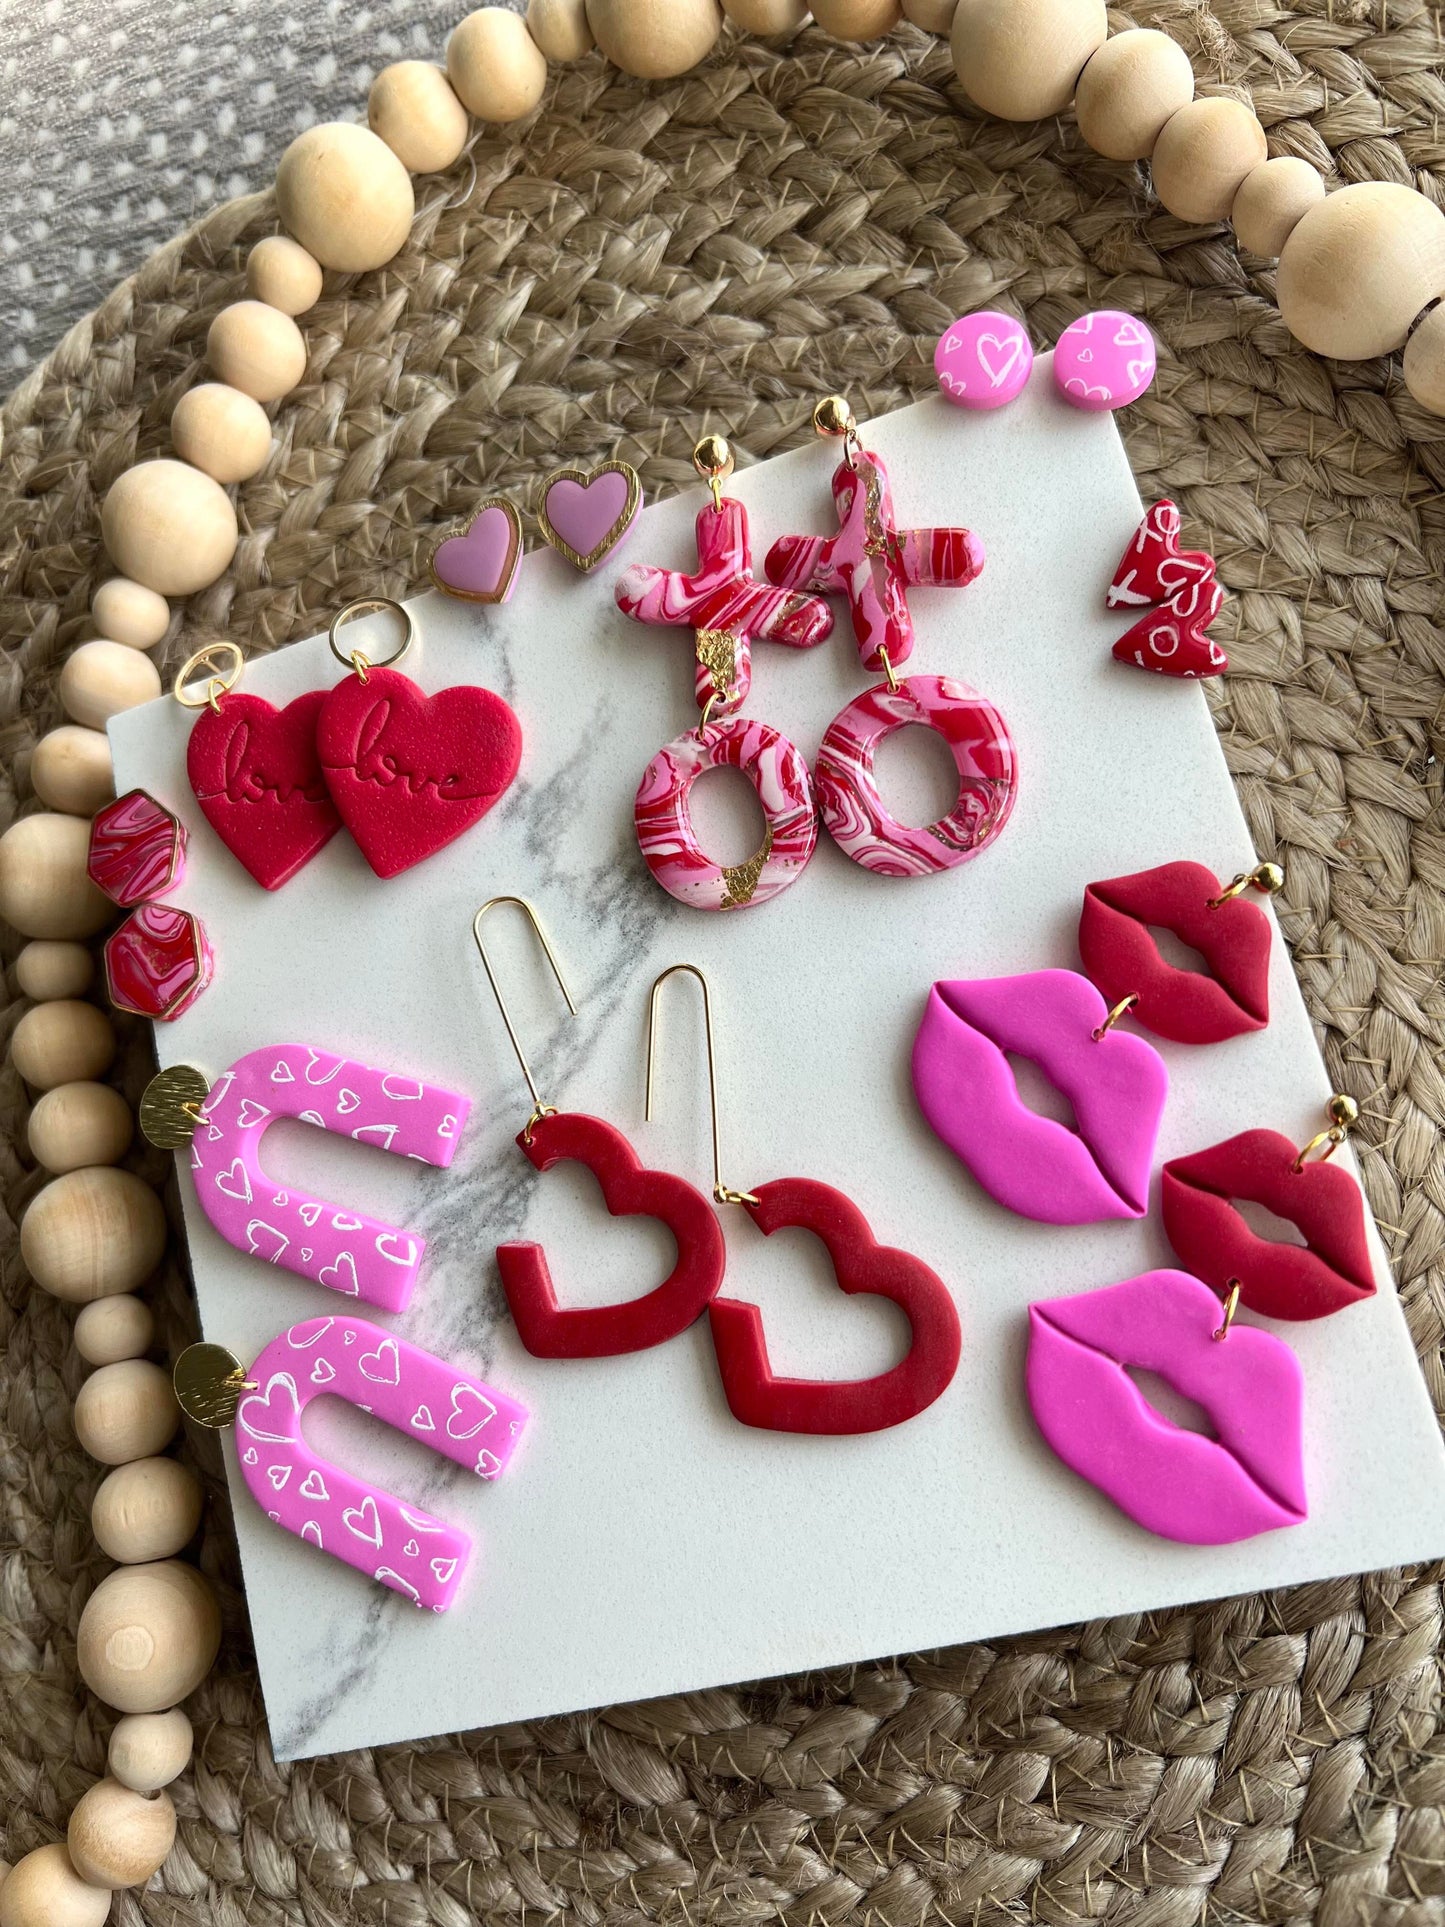 EGB Valentine’s Day Earring Collection By Clover Clay